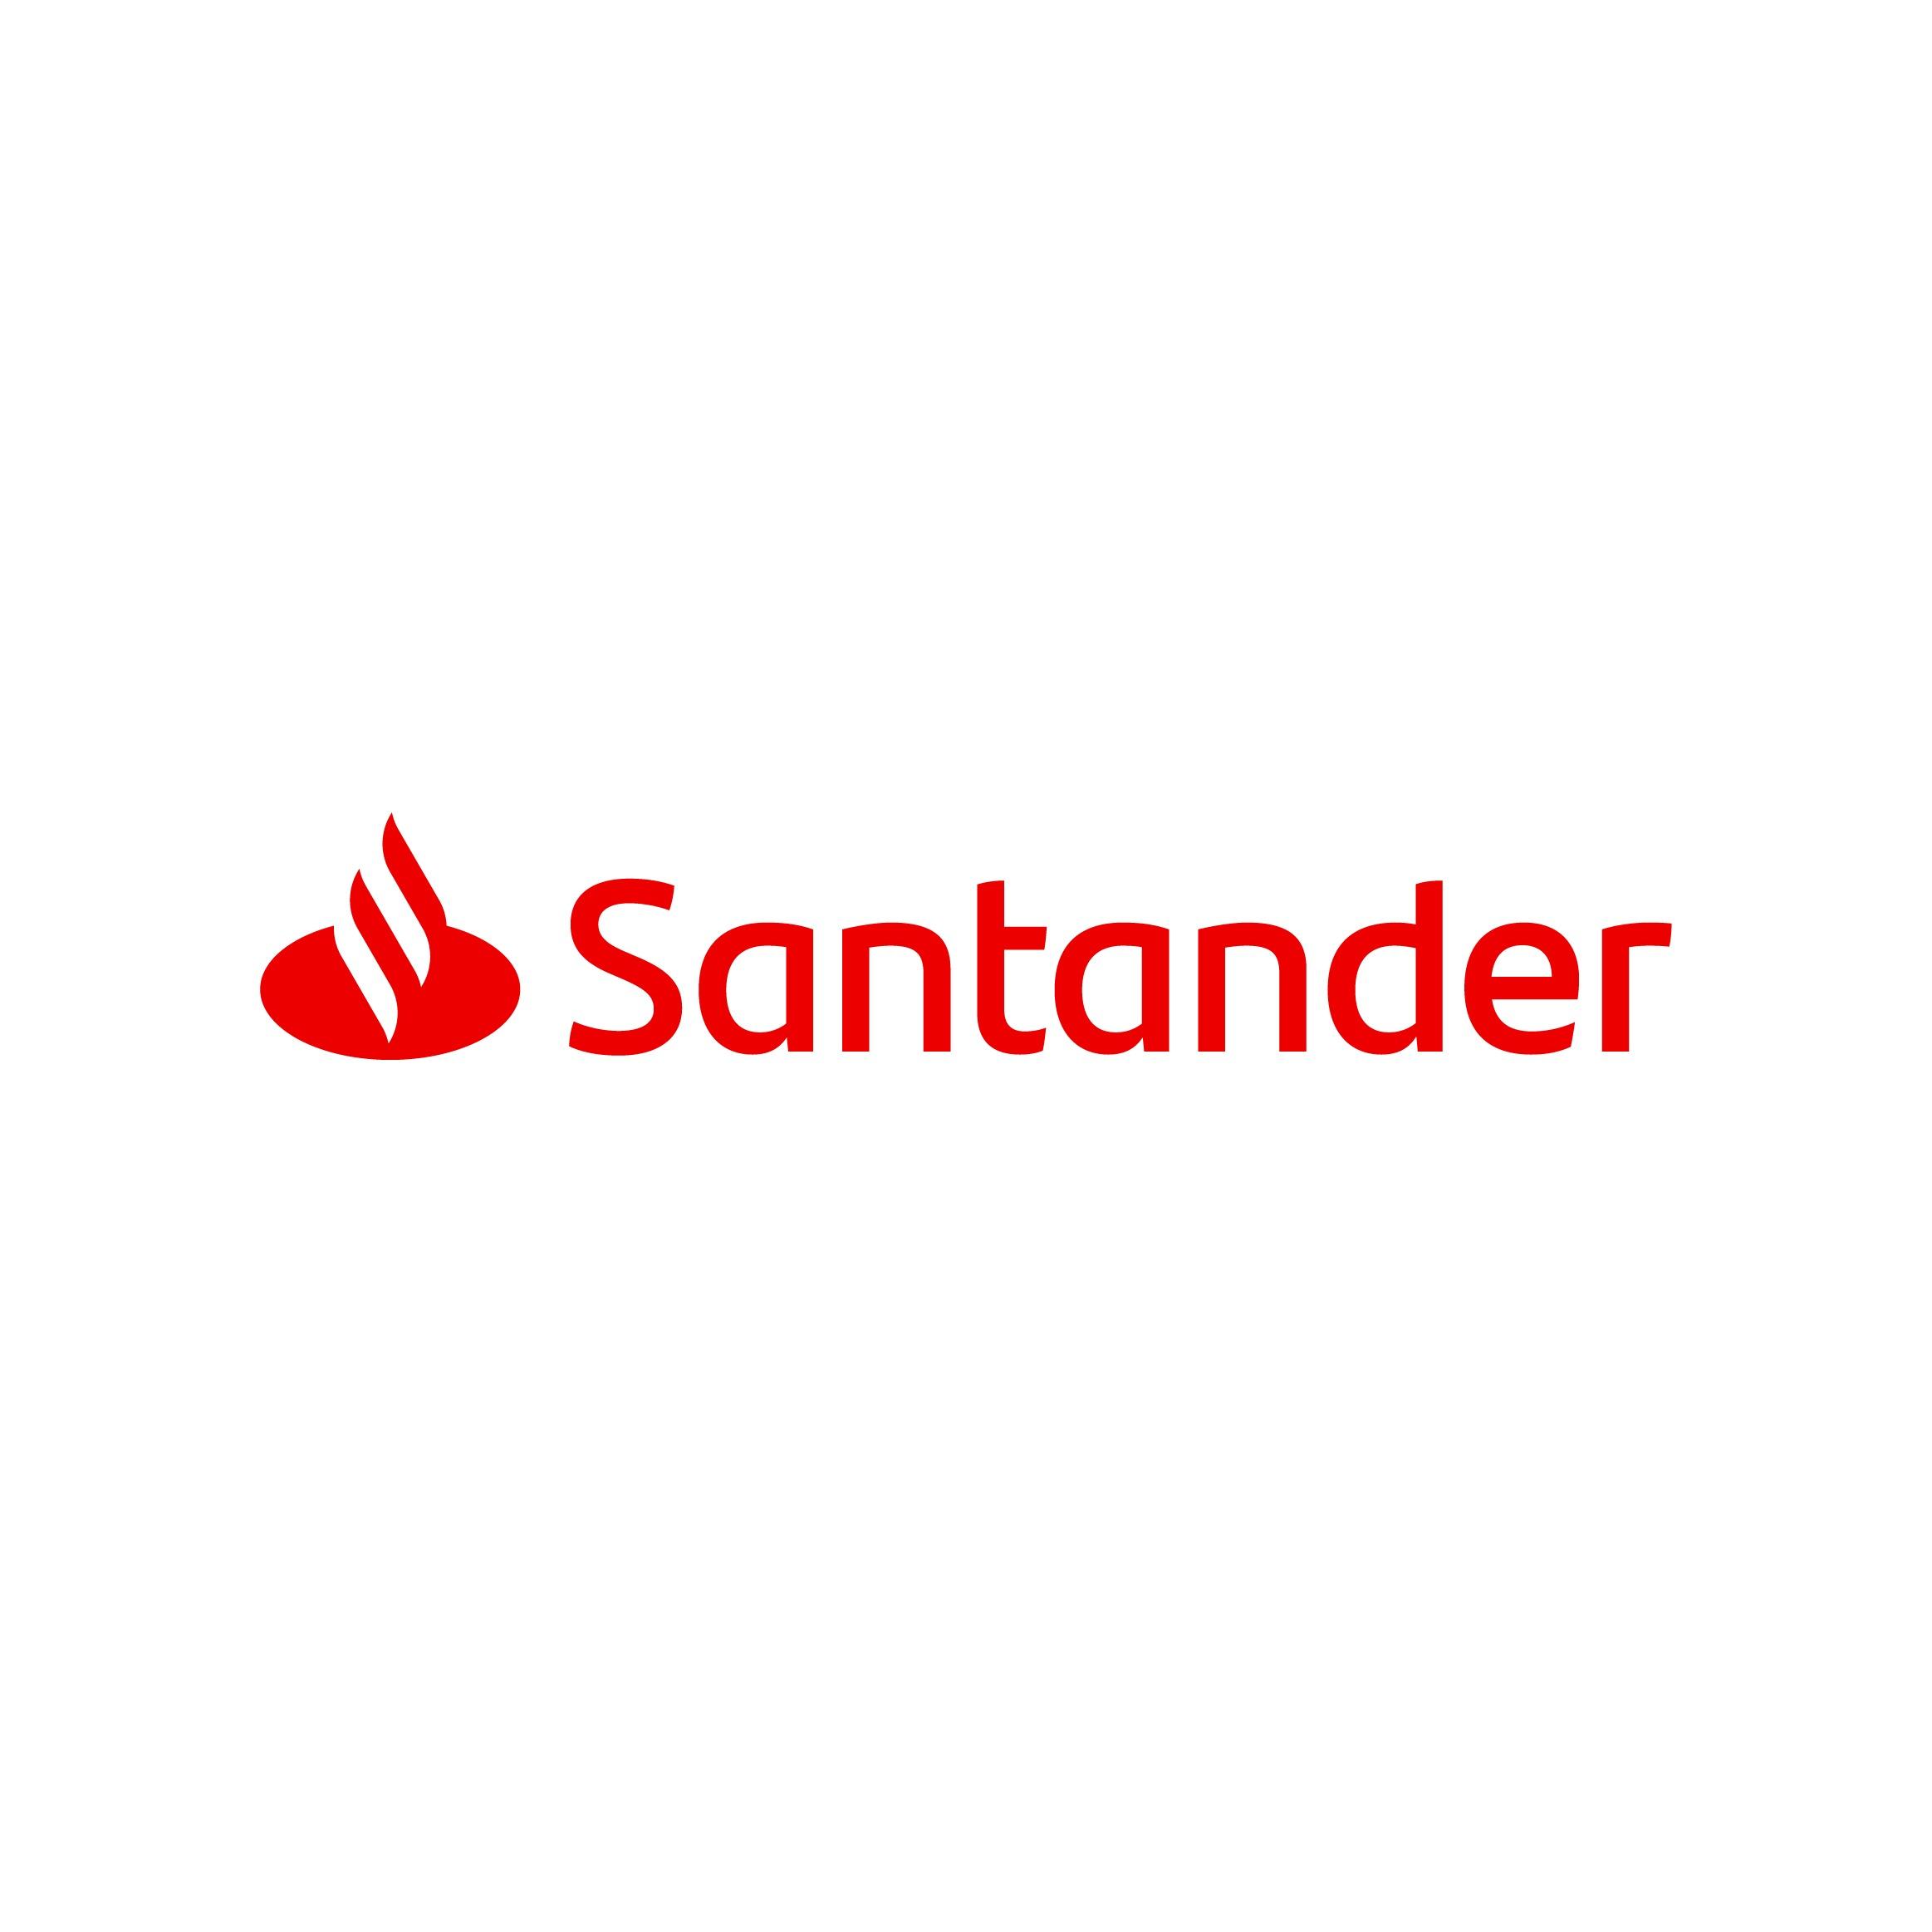 santander bank in staten island, ny | 475 forest avenue | checking